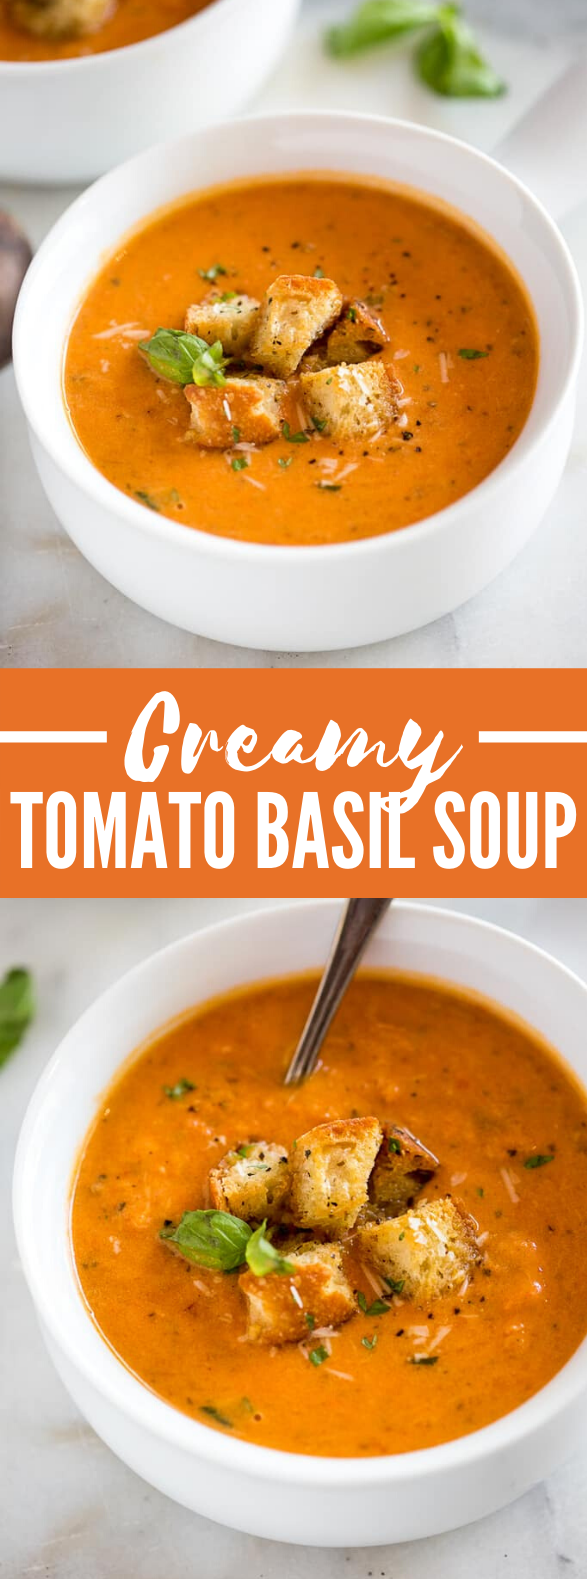 CREAMY TOMATO BASIL SOUP #appetizers #dinner